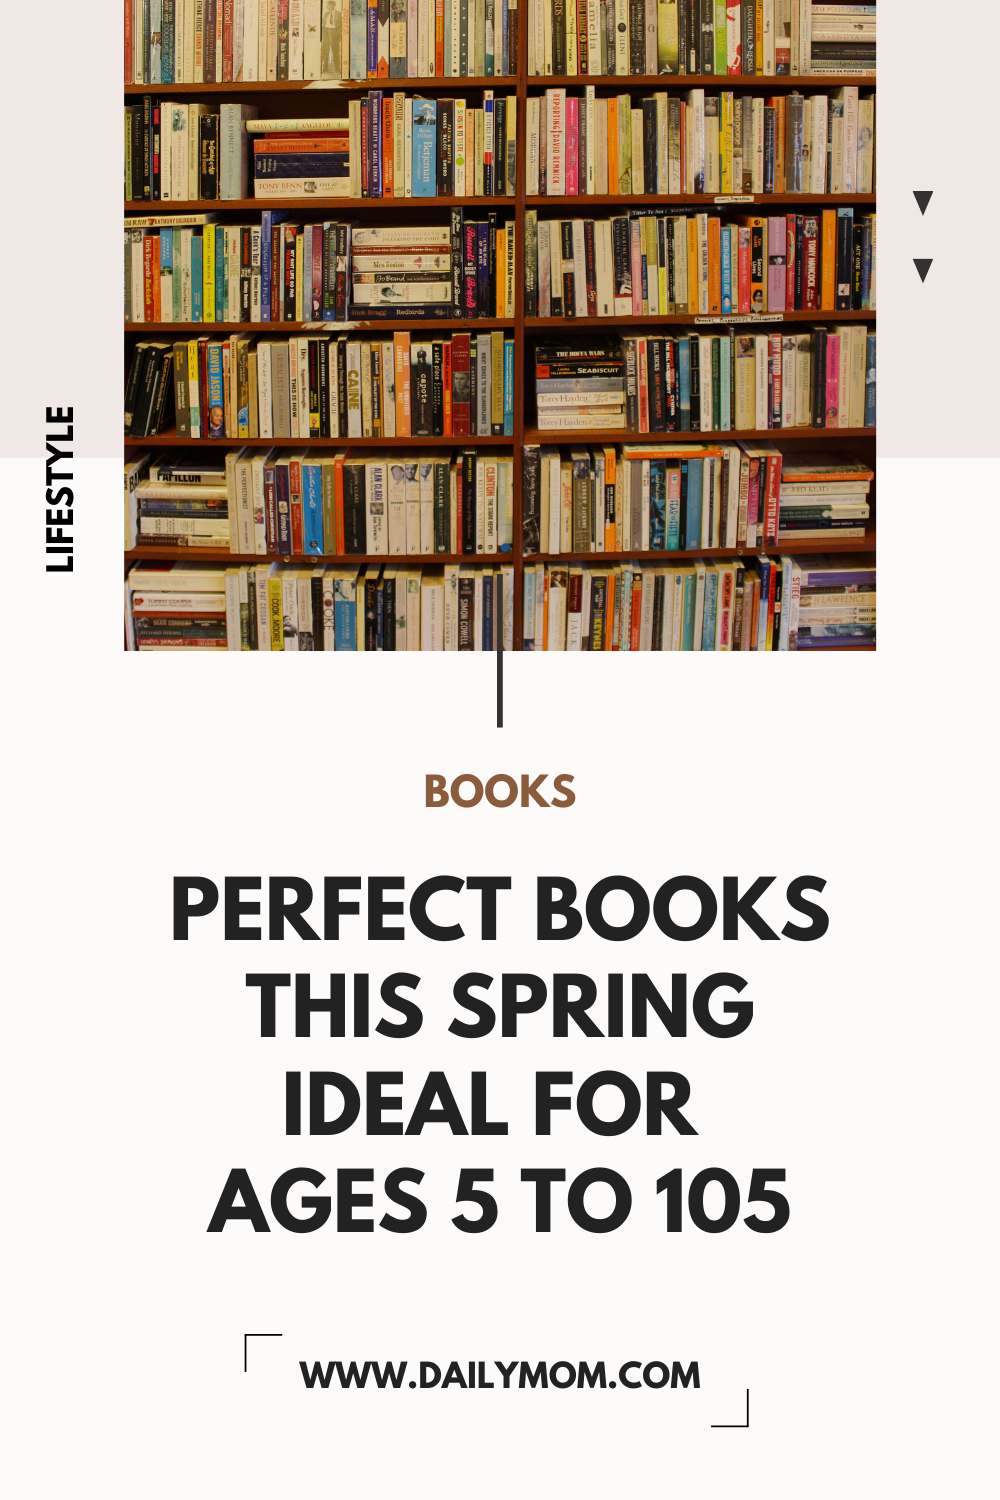 Finding The Perfect Book For Gifts This Spring For Ages 5 To 105